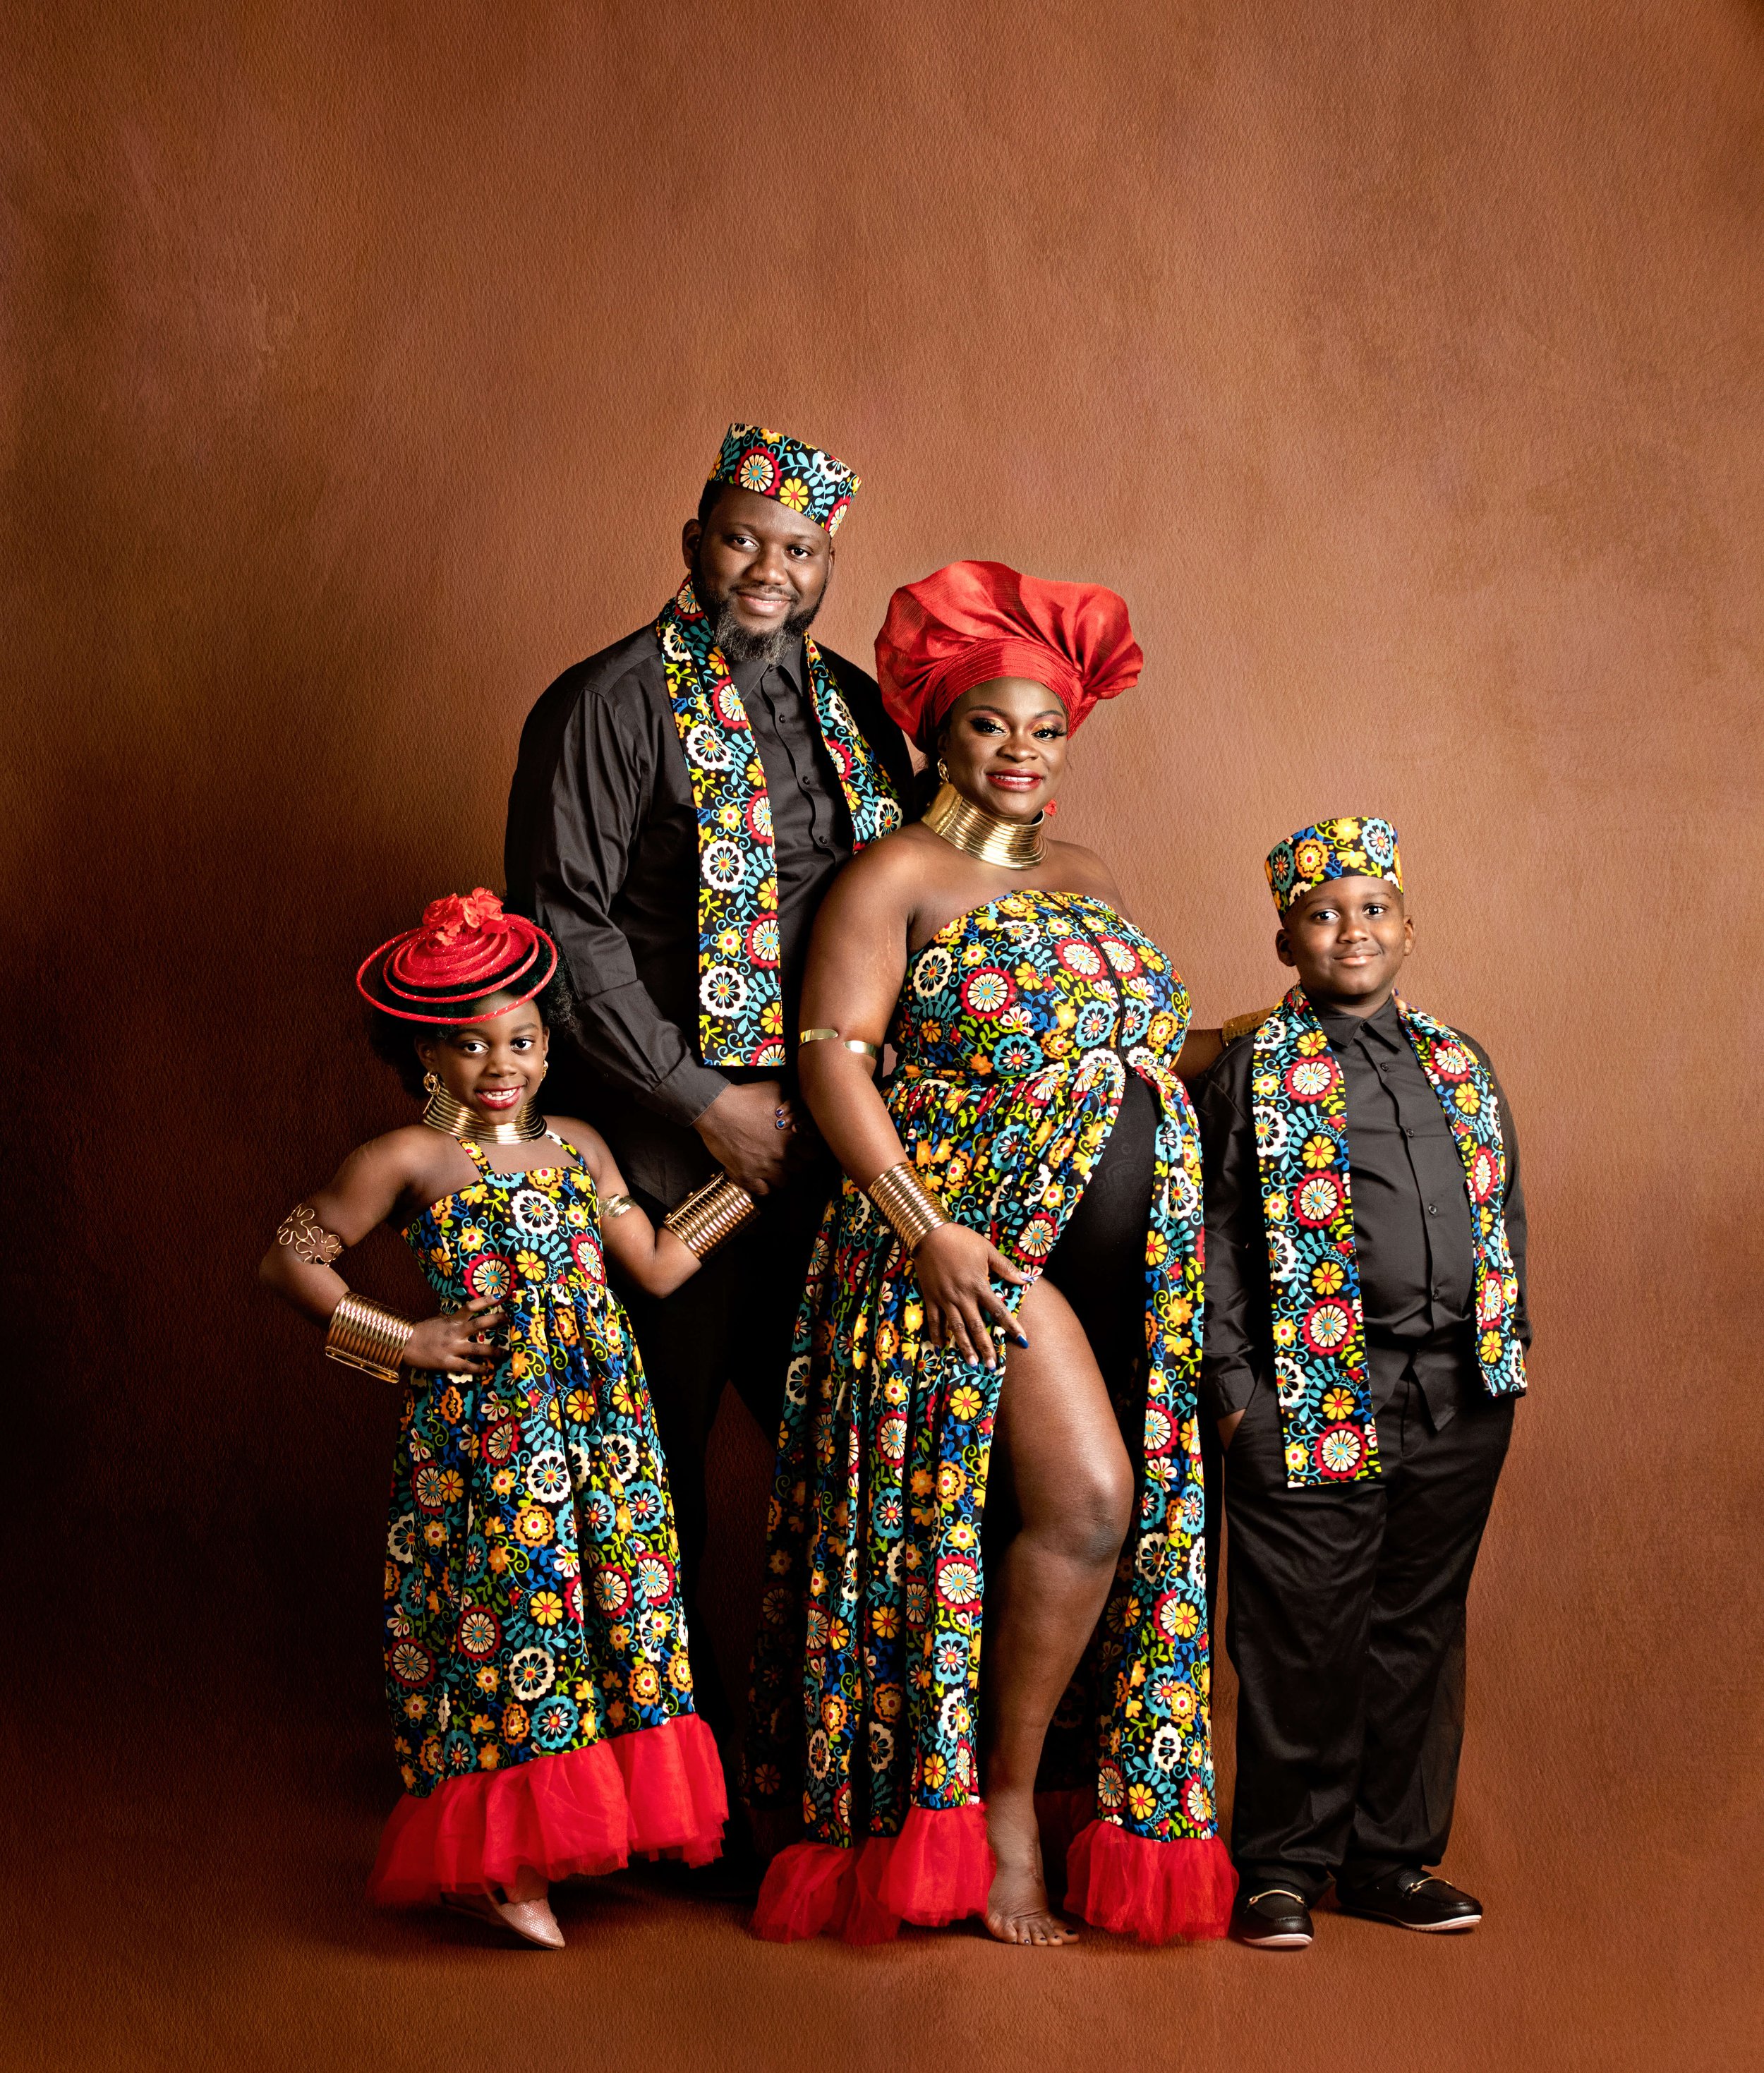 African Theme Maternity Family photo session.jpg